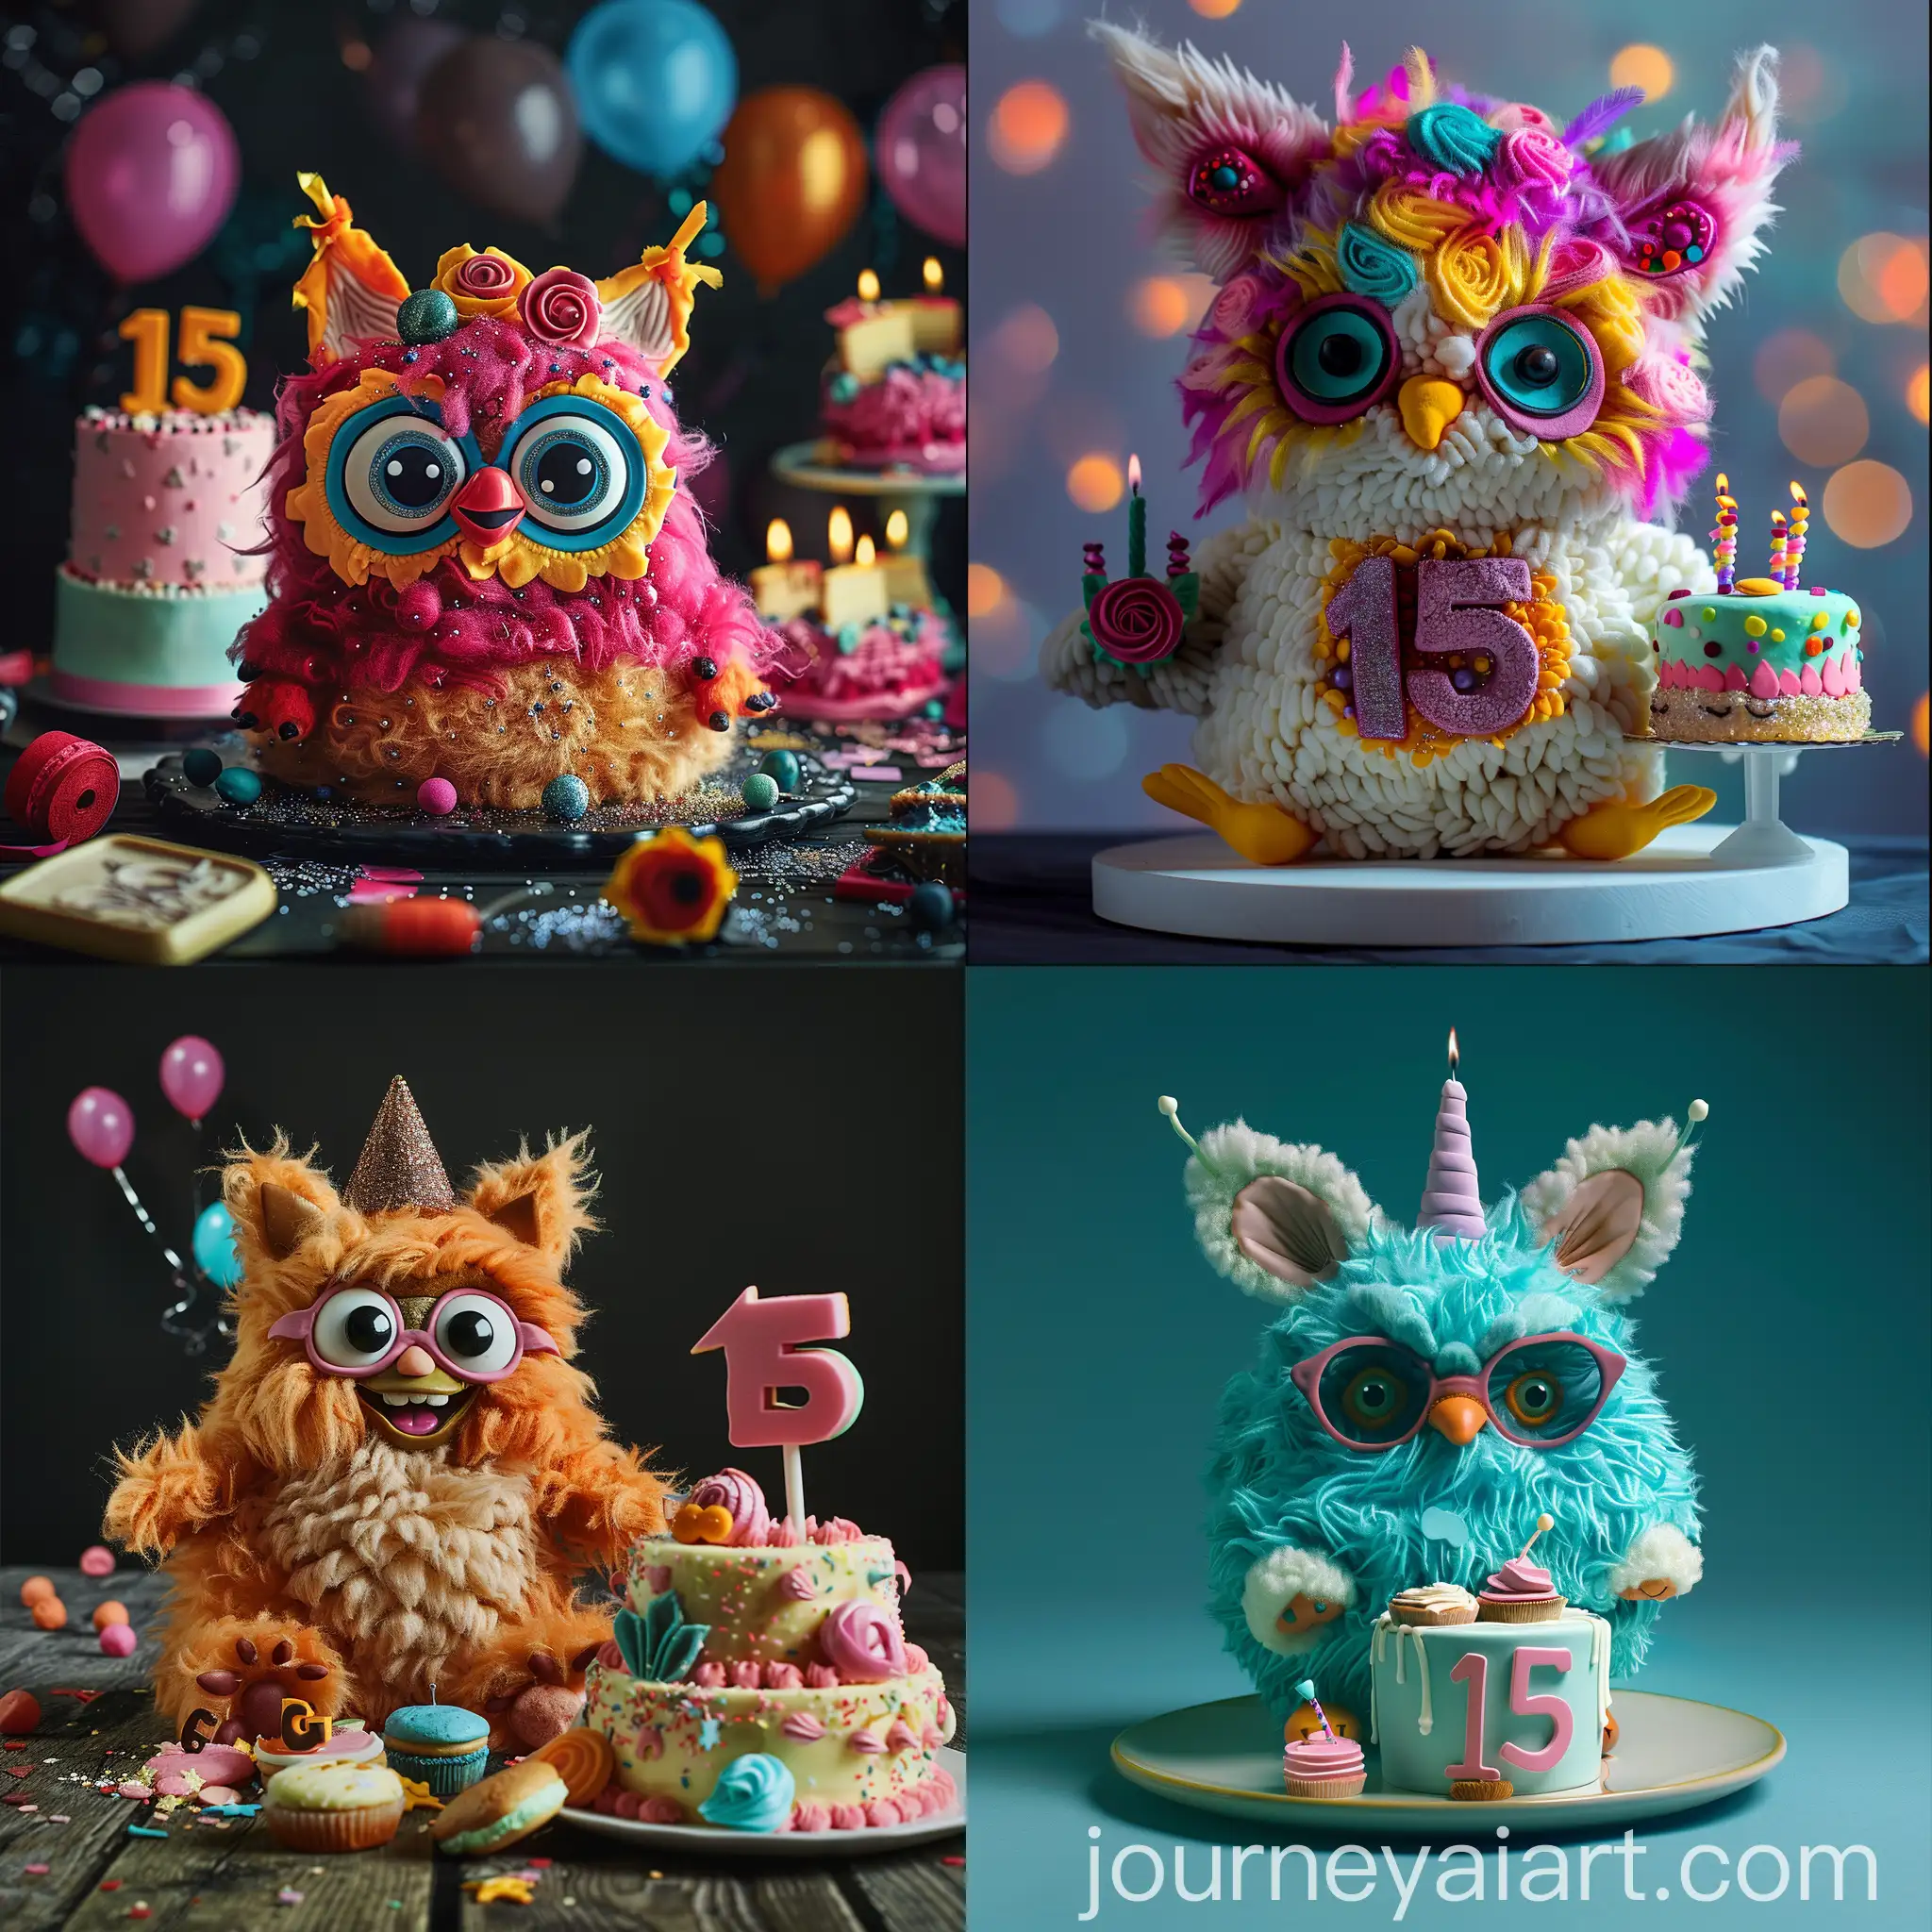 Furby-Celebrating-with-Cakes-and-Number-15